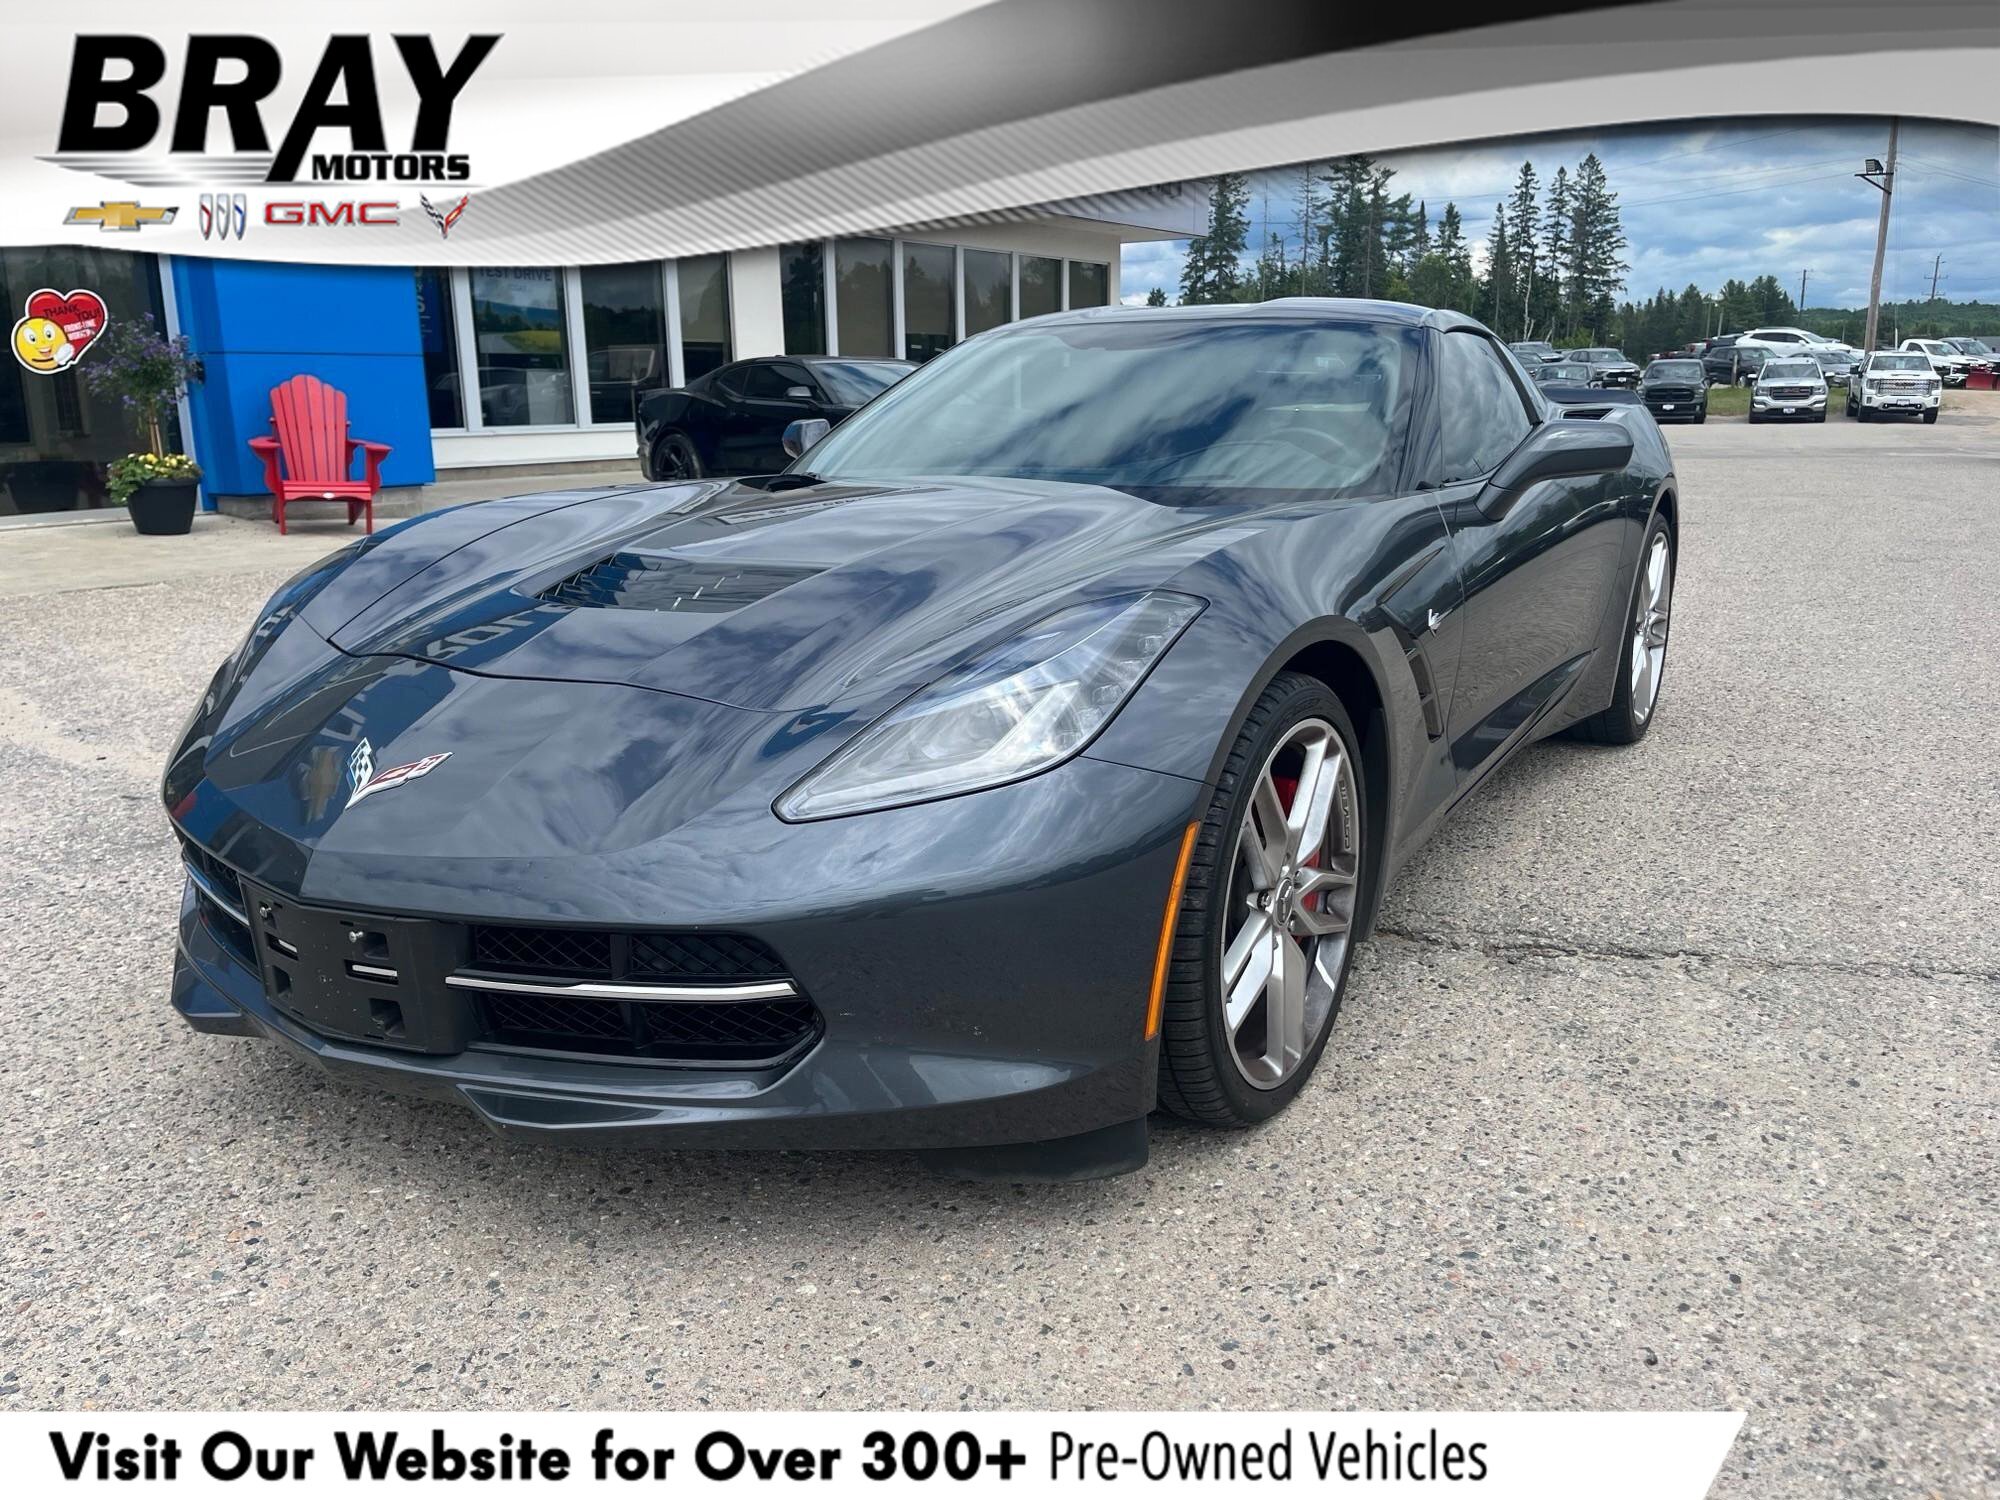 2014 Chevrolet Corvette Stingray Z51 CERTIFIED AS-TRADED WITH A CLEAN CARFAX!